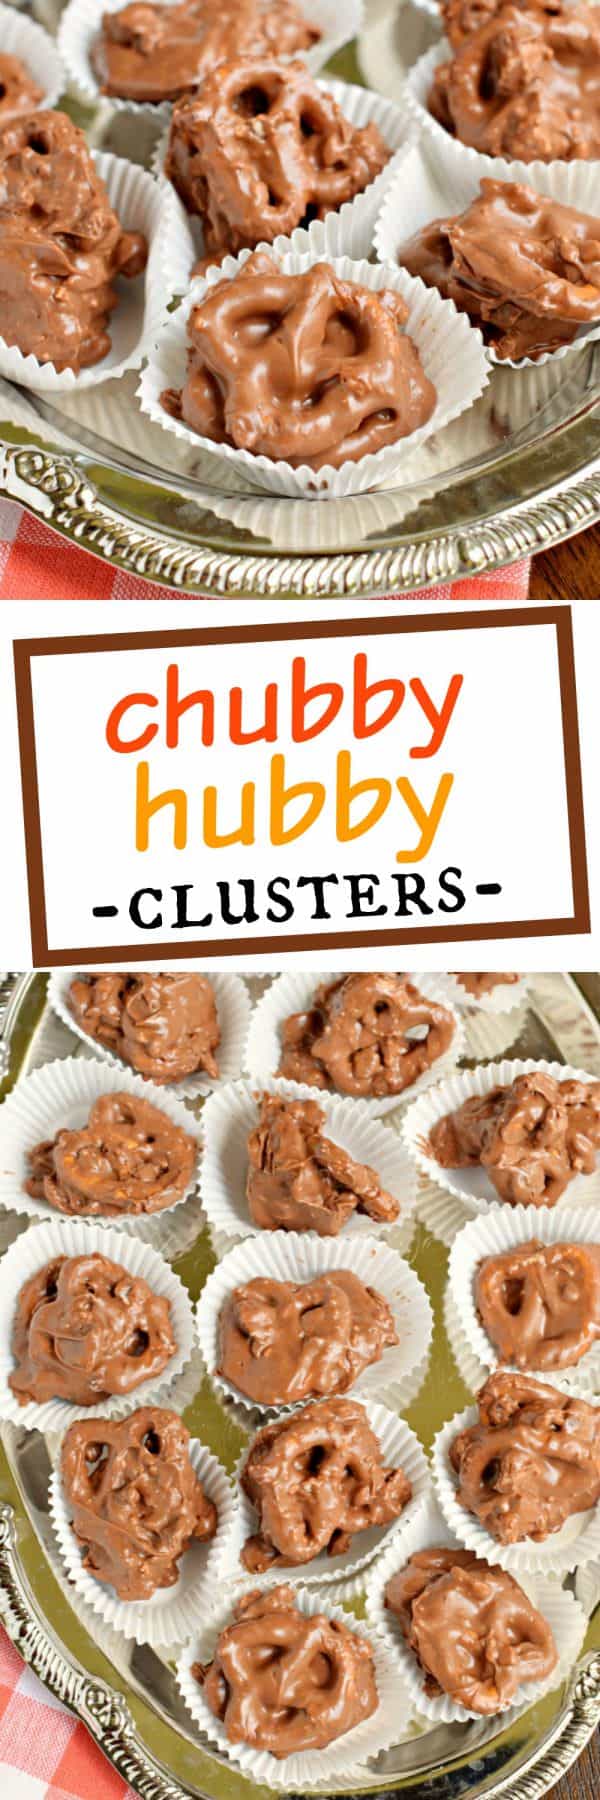 Chubby hubby ingredient